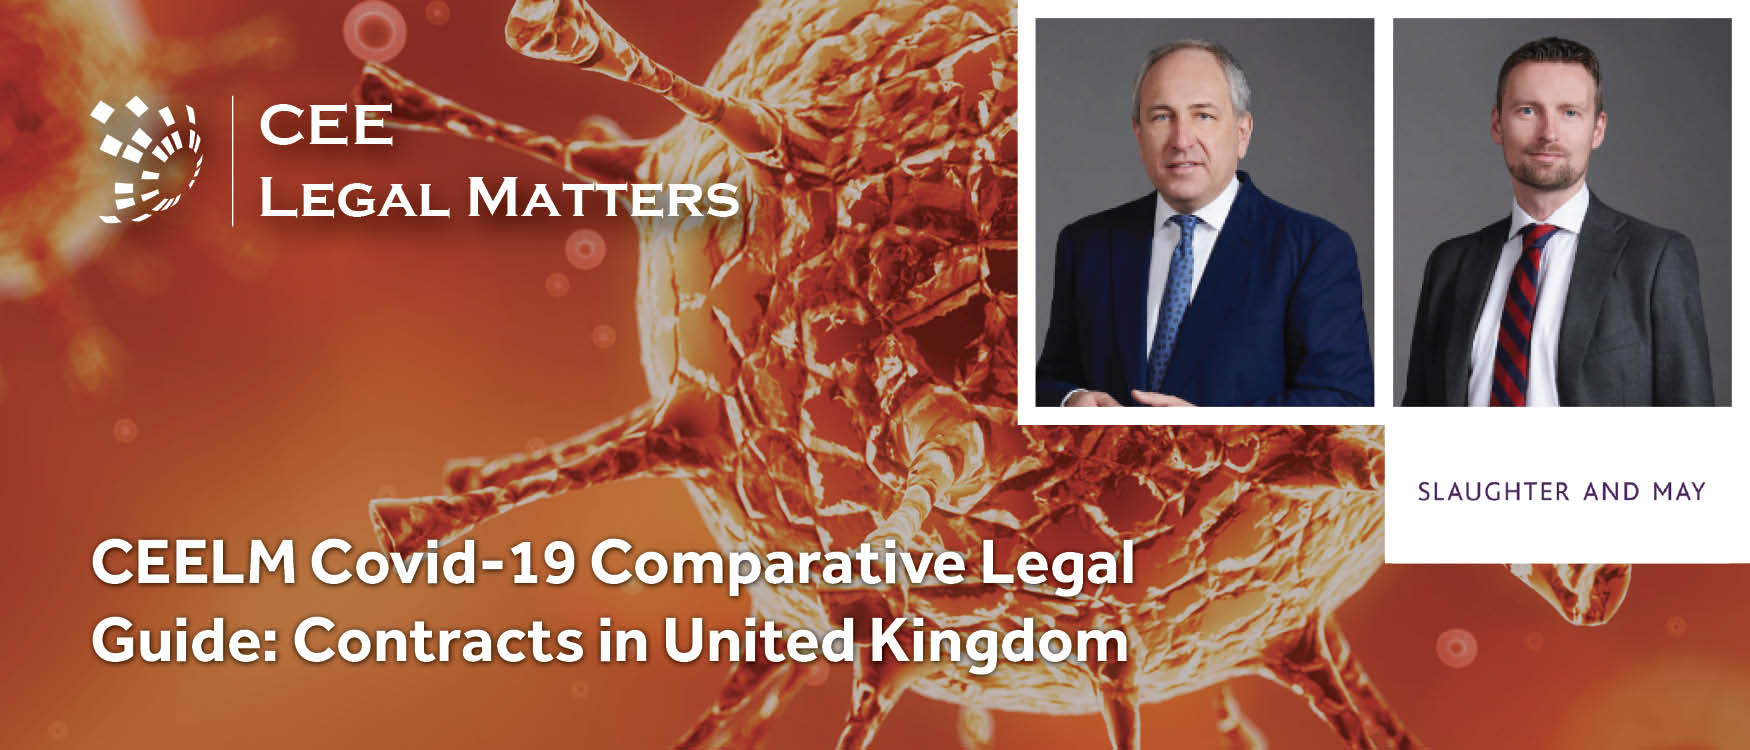 CEELM Covid-19 Comparative Legal Guide: Contracts in the UK